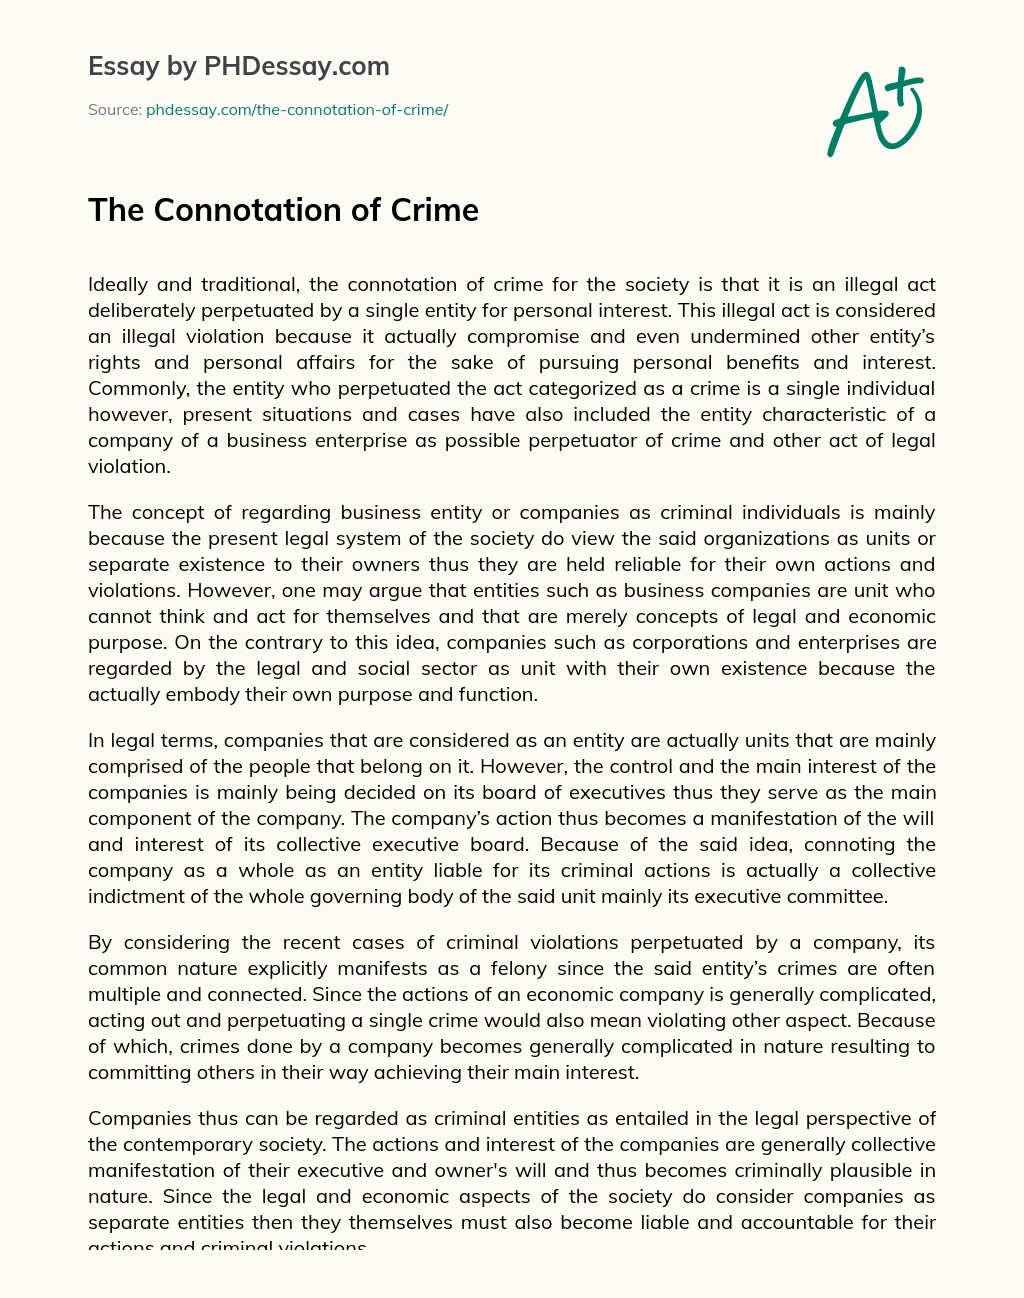 The Connotation of Crime essay